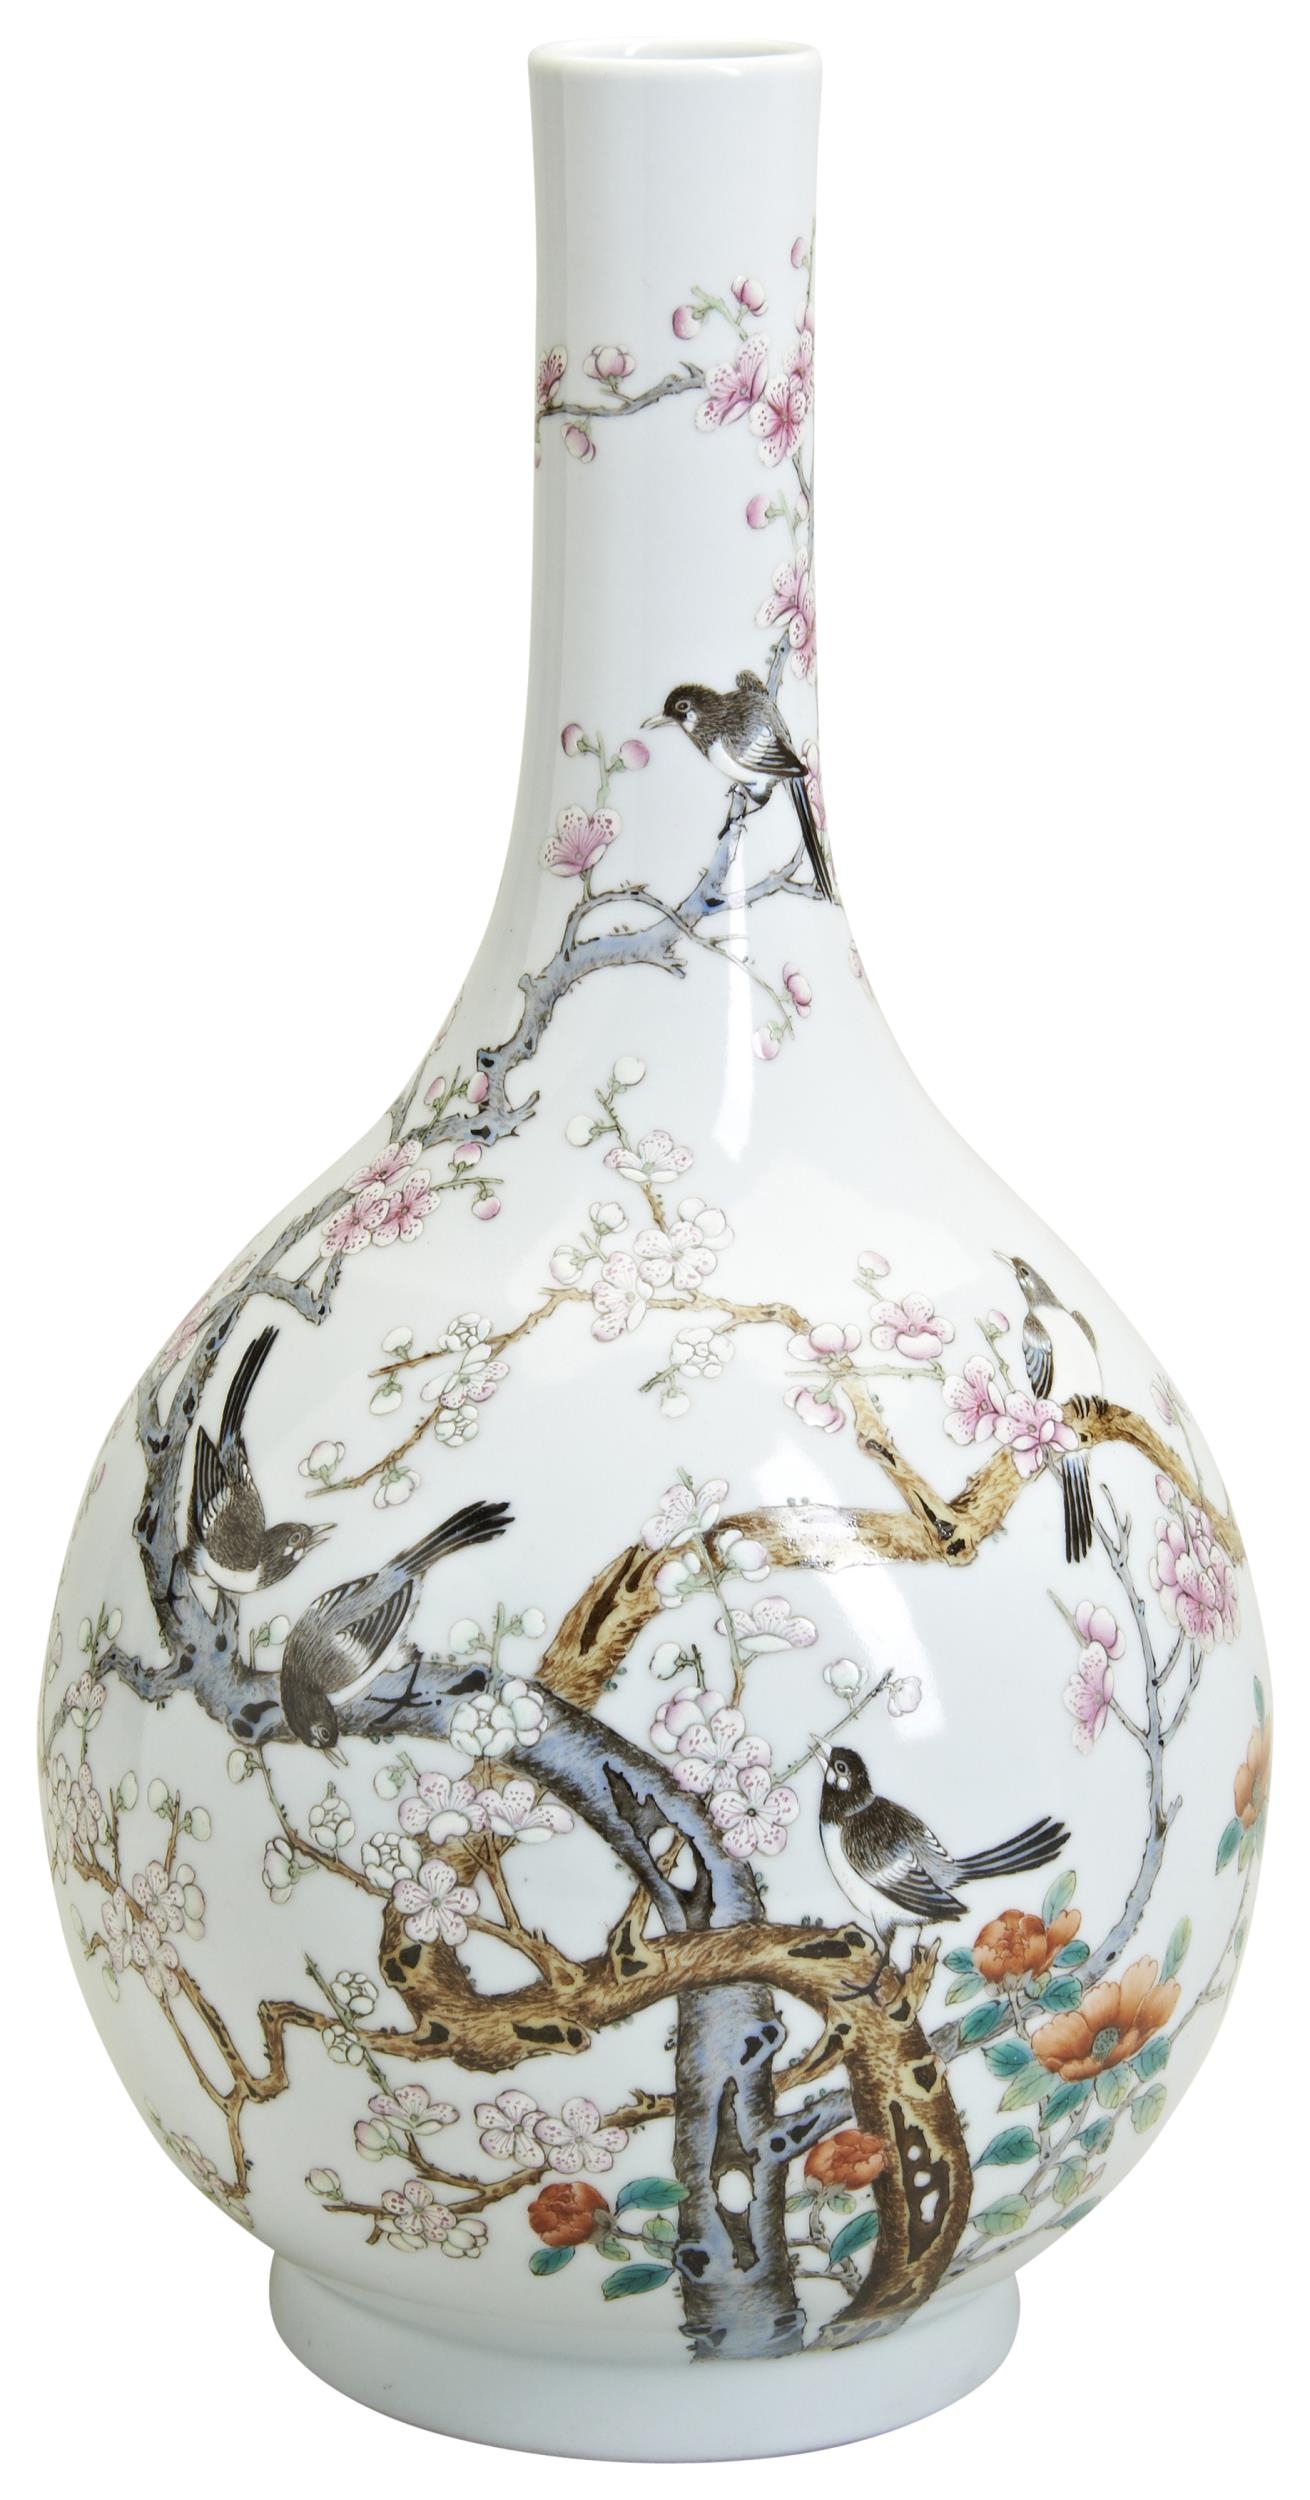 A FINE FAMILLE ROSE BOTTLE VASE REPUBLIC PERIOD (1912-1949)  清 喜上眉梢长颈瓶 decorated with prunus and